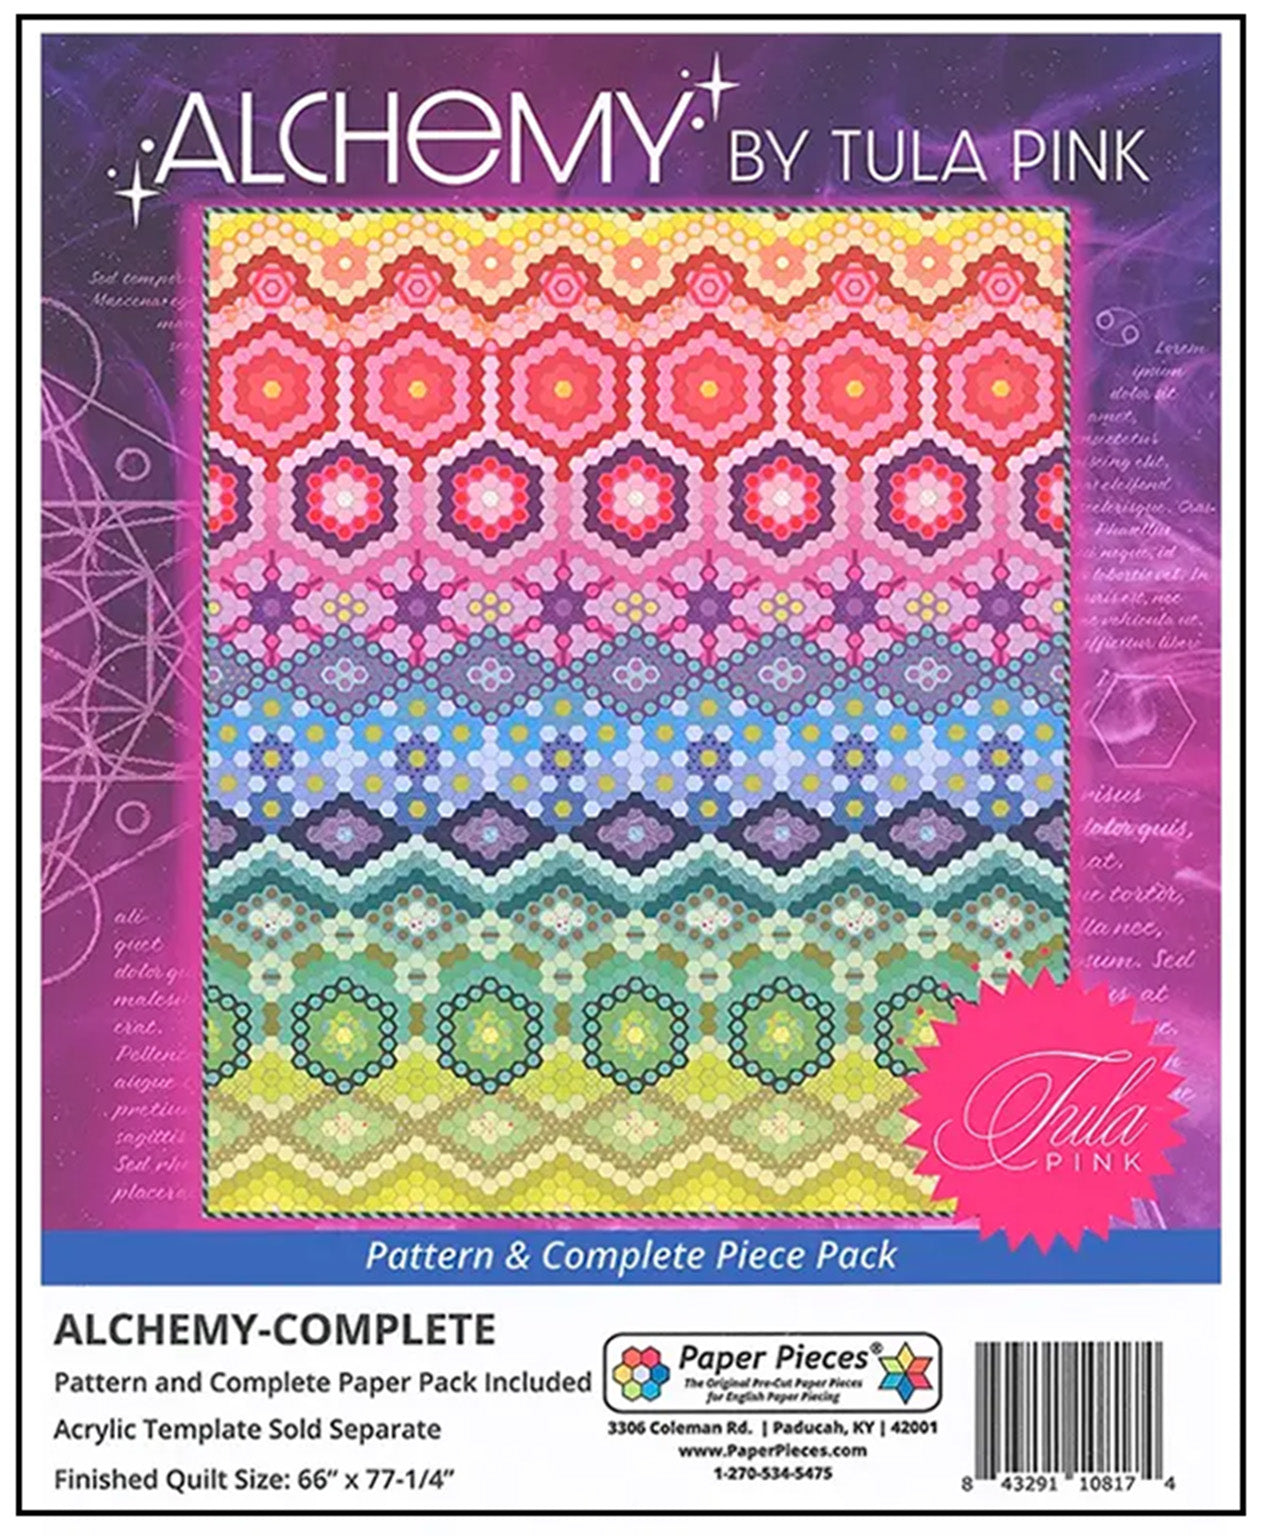 Alchemy Quilt Pattern and Paper Piece Pack Complete Set by Tula Pink